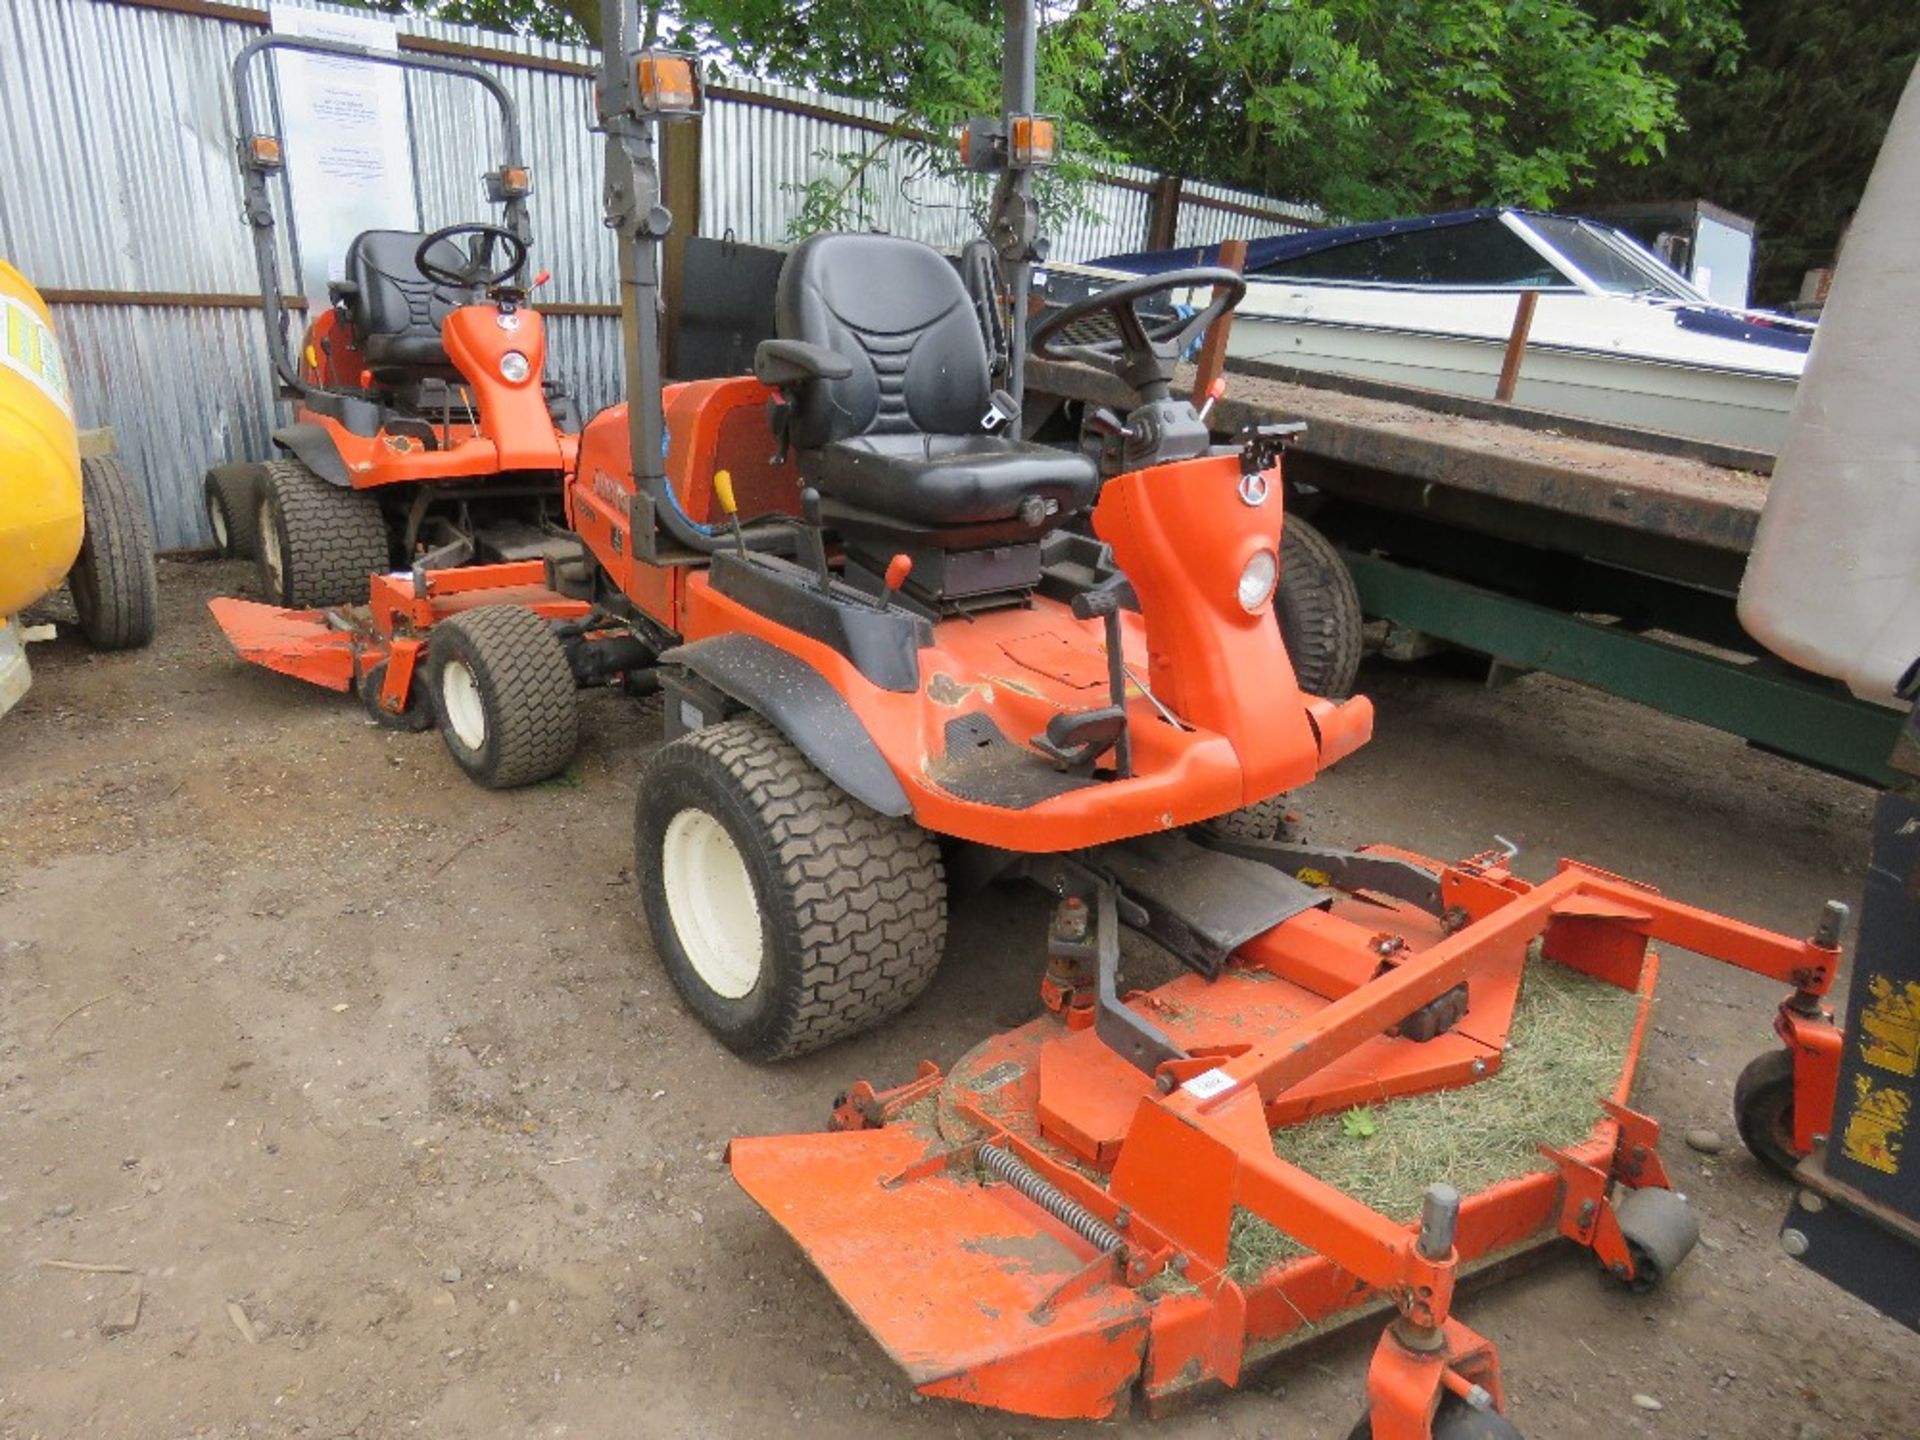 KUBOTA F2880 RIDE ON MOWER WITH OUT FRONT ROTARY DECK, YEAR 2014, 2670REC HRS REG:SF14 HXM WHEN